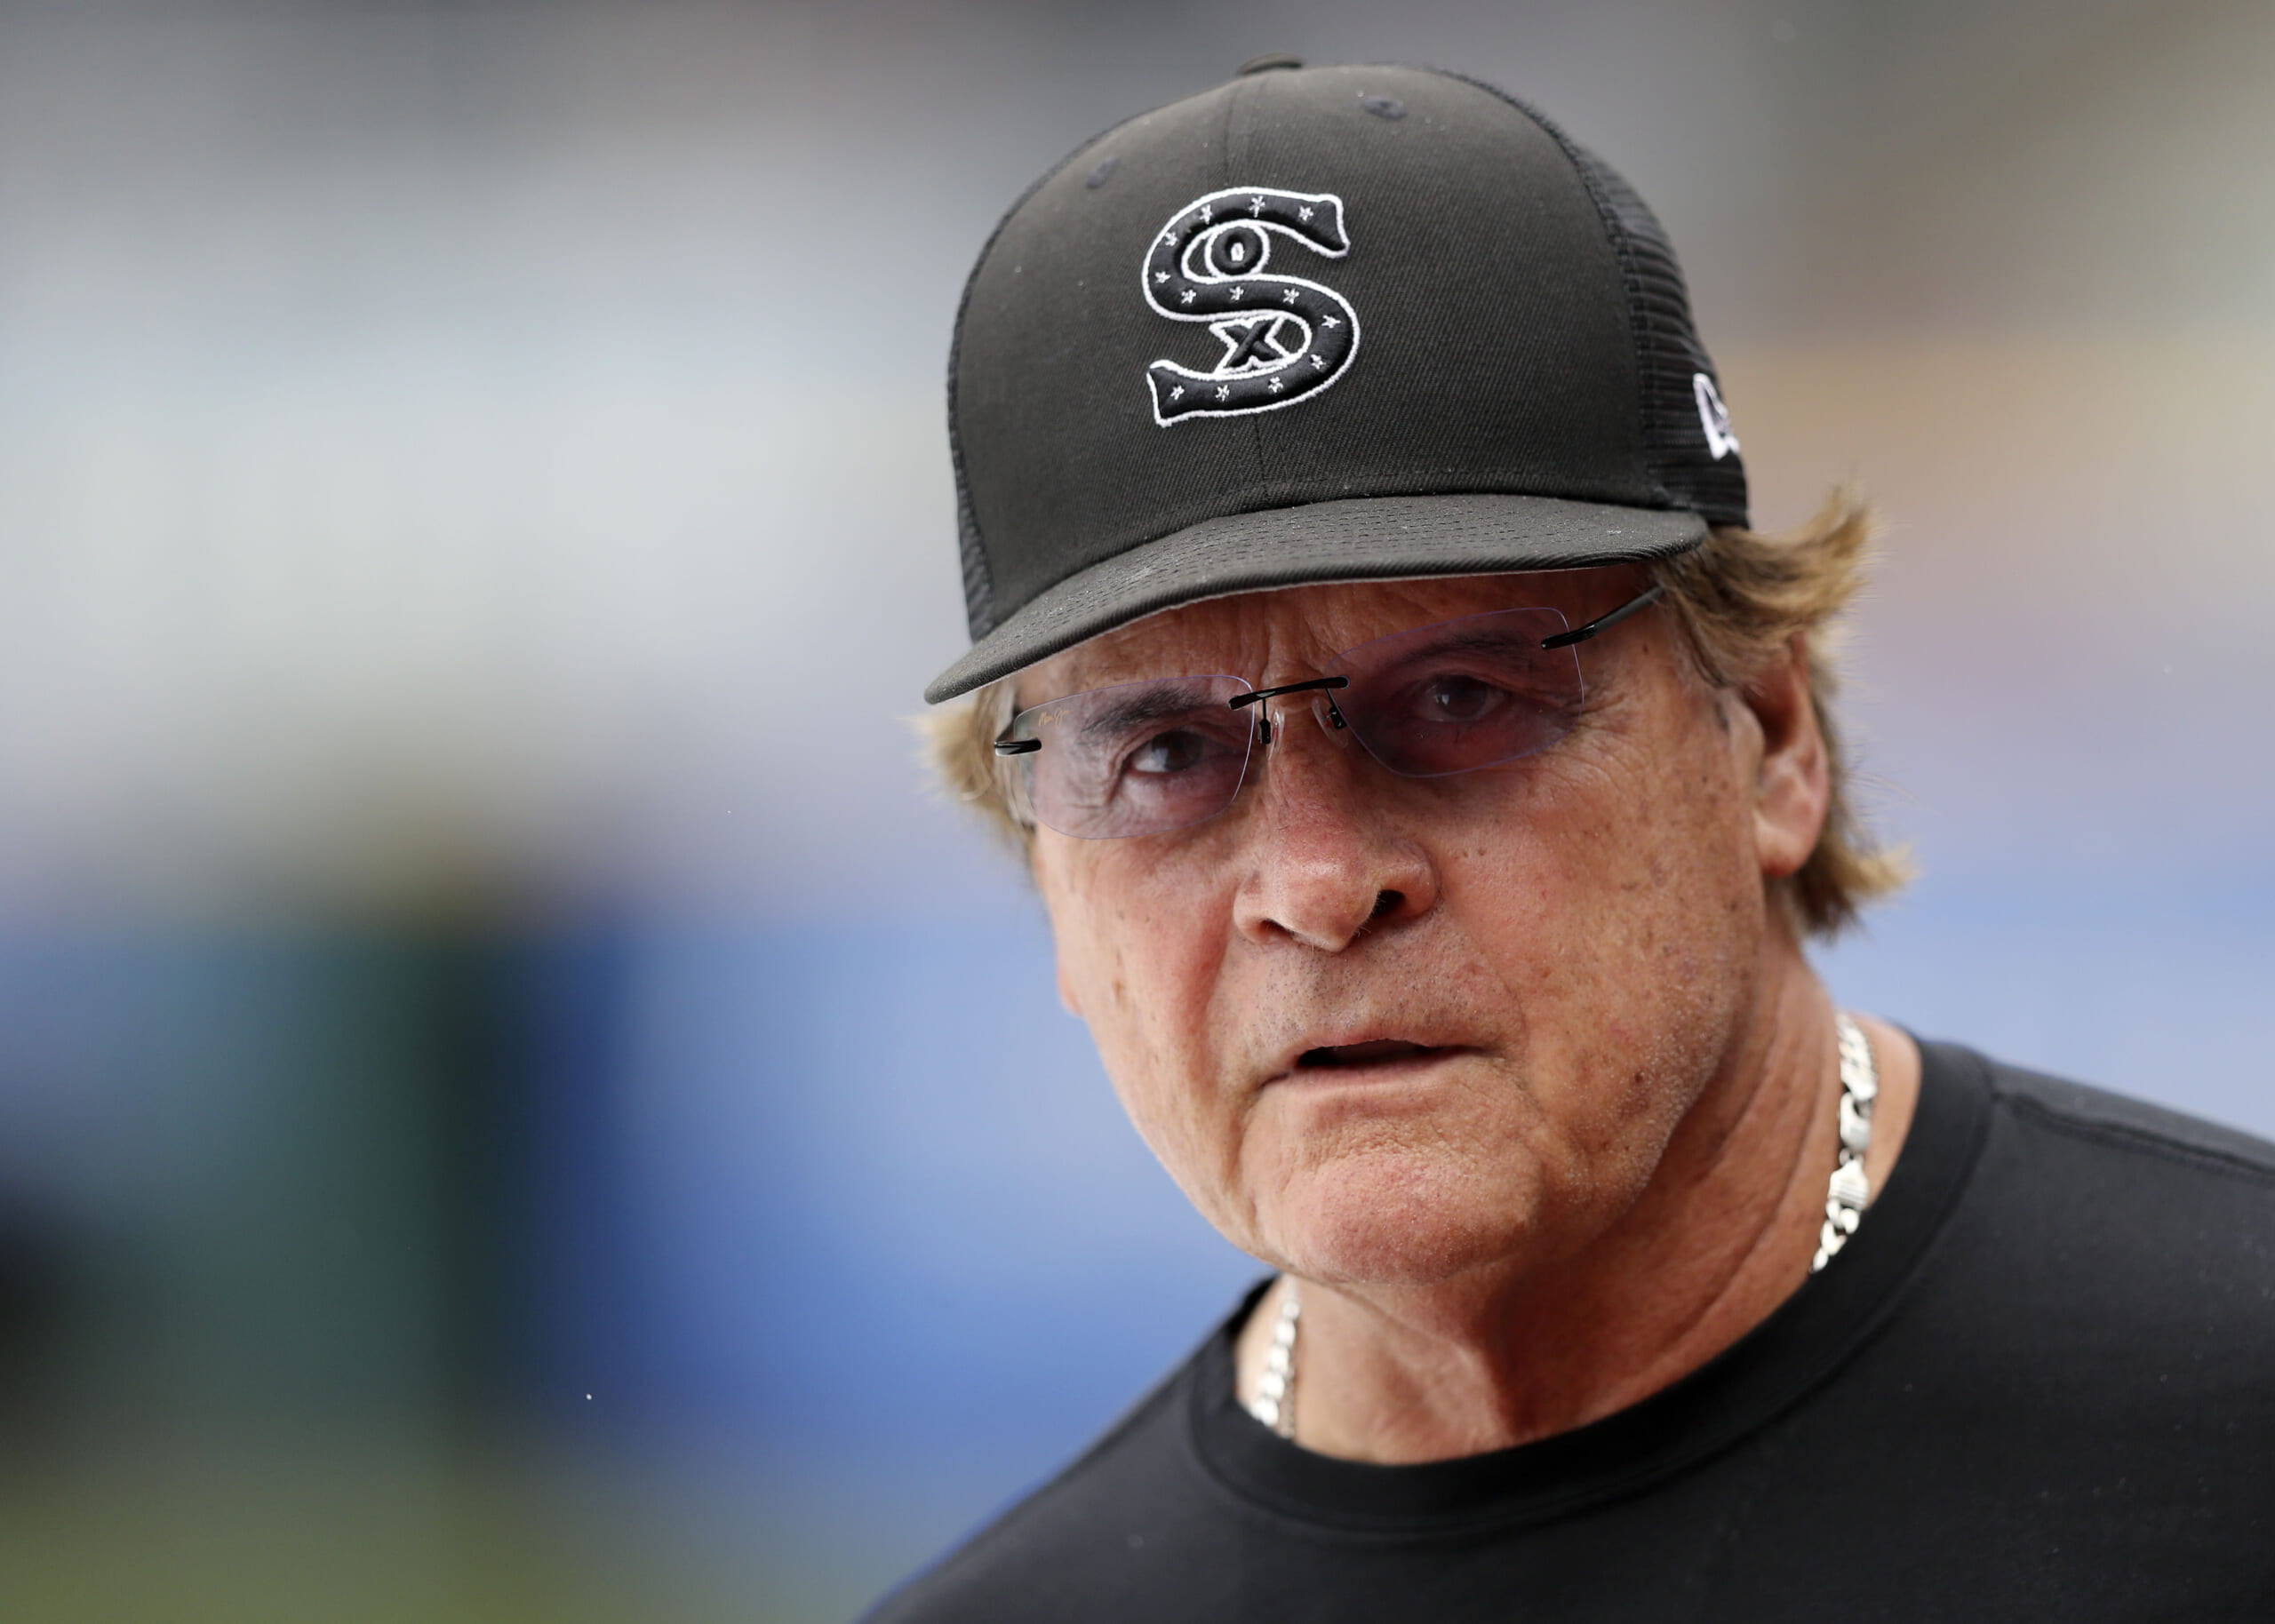 White Sox manager La Russa misses game, going for further medical